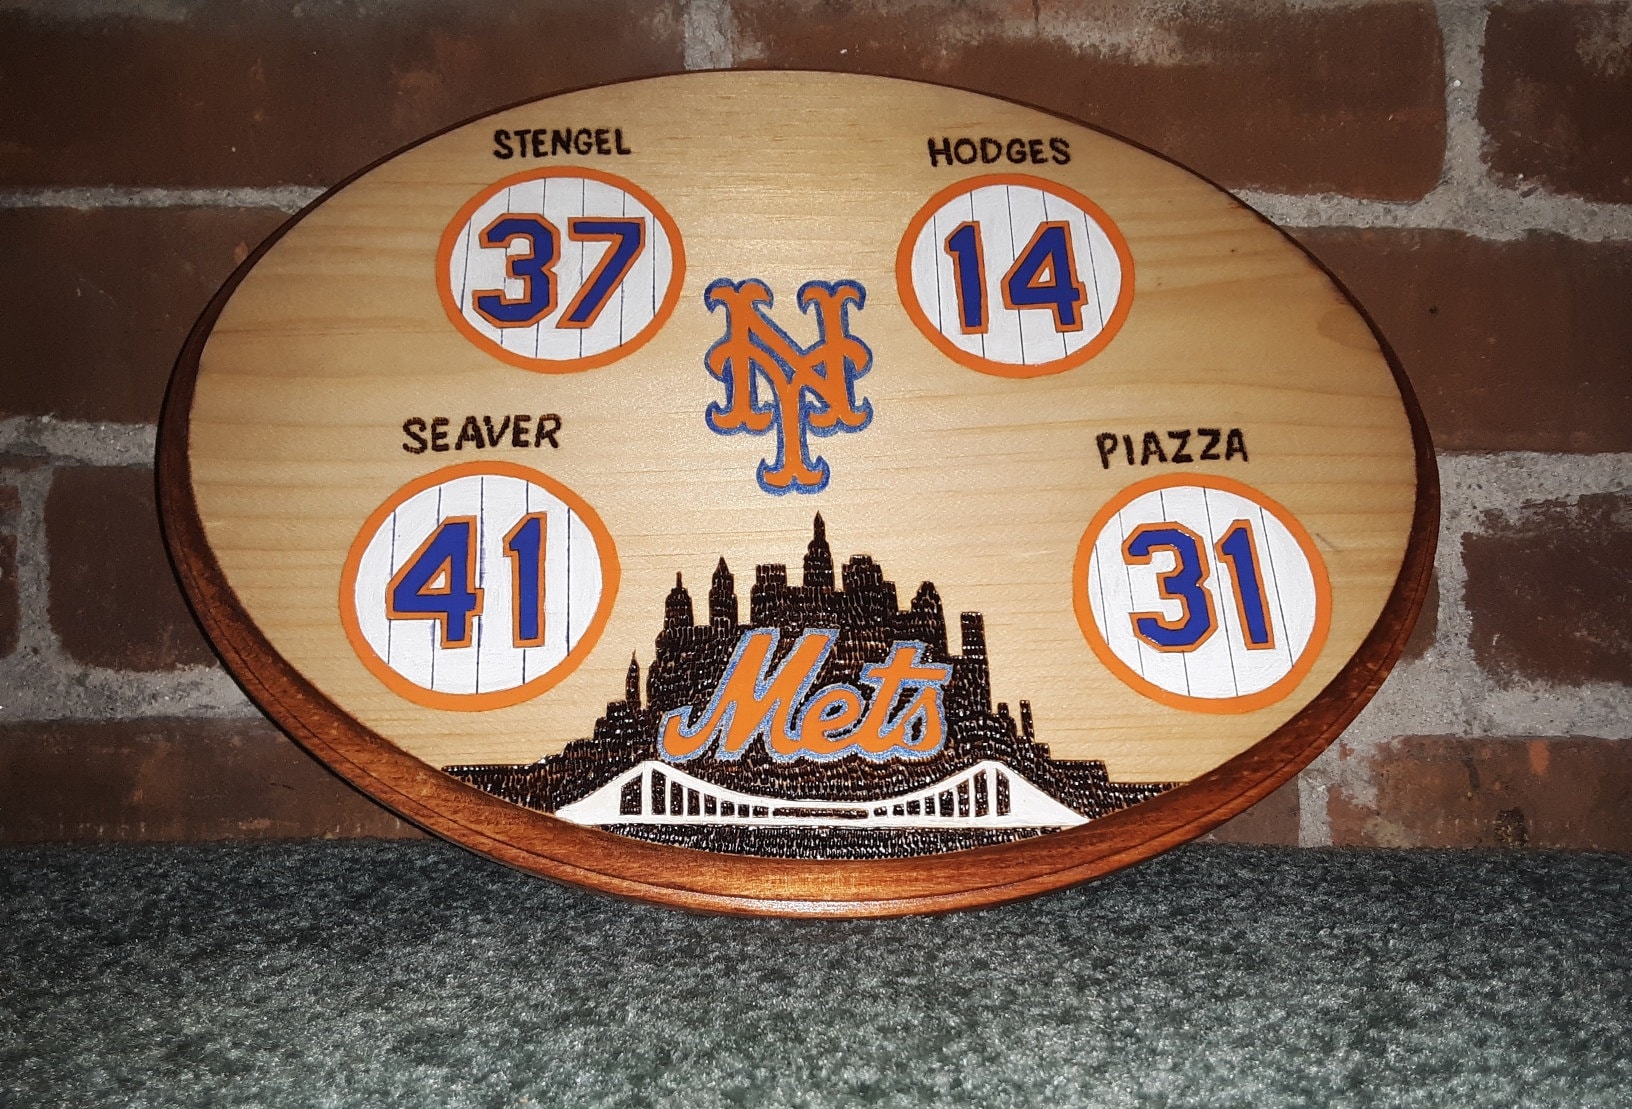 NY METS RETIRED NUMBER 6 SIGNS HALL OF FAME SEAVER PIAZZA HODGES